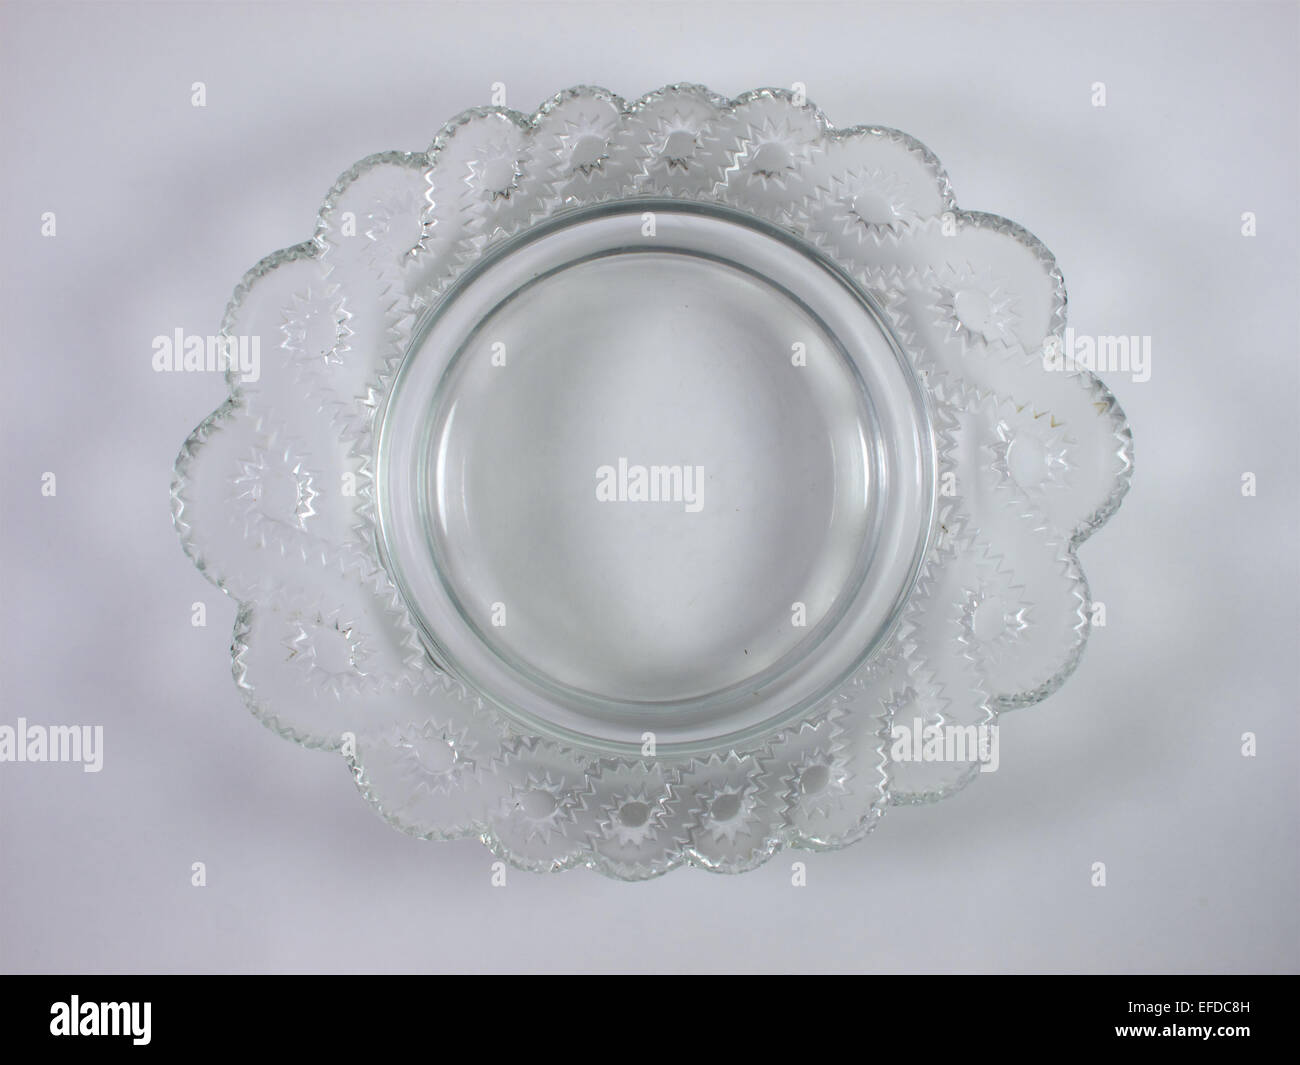 Lalique Crystal glass bowl, Stock Photo